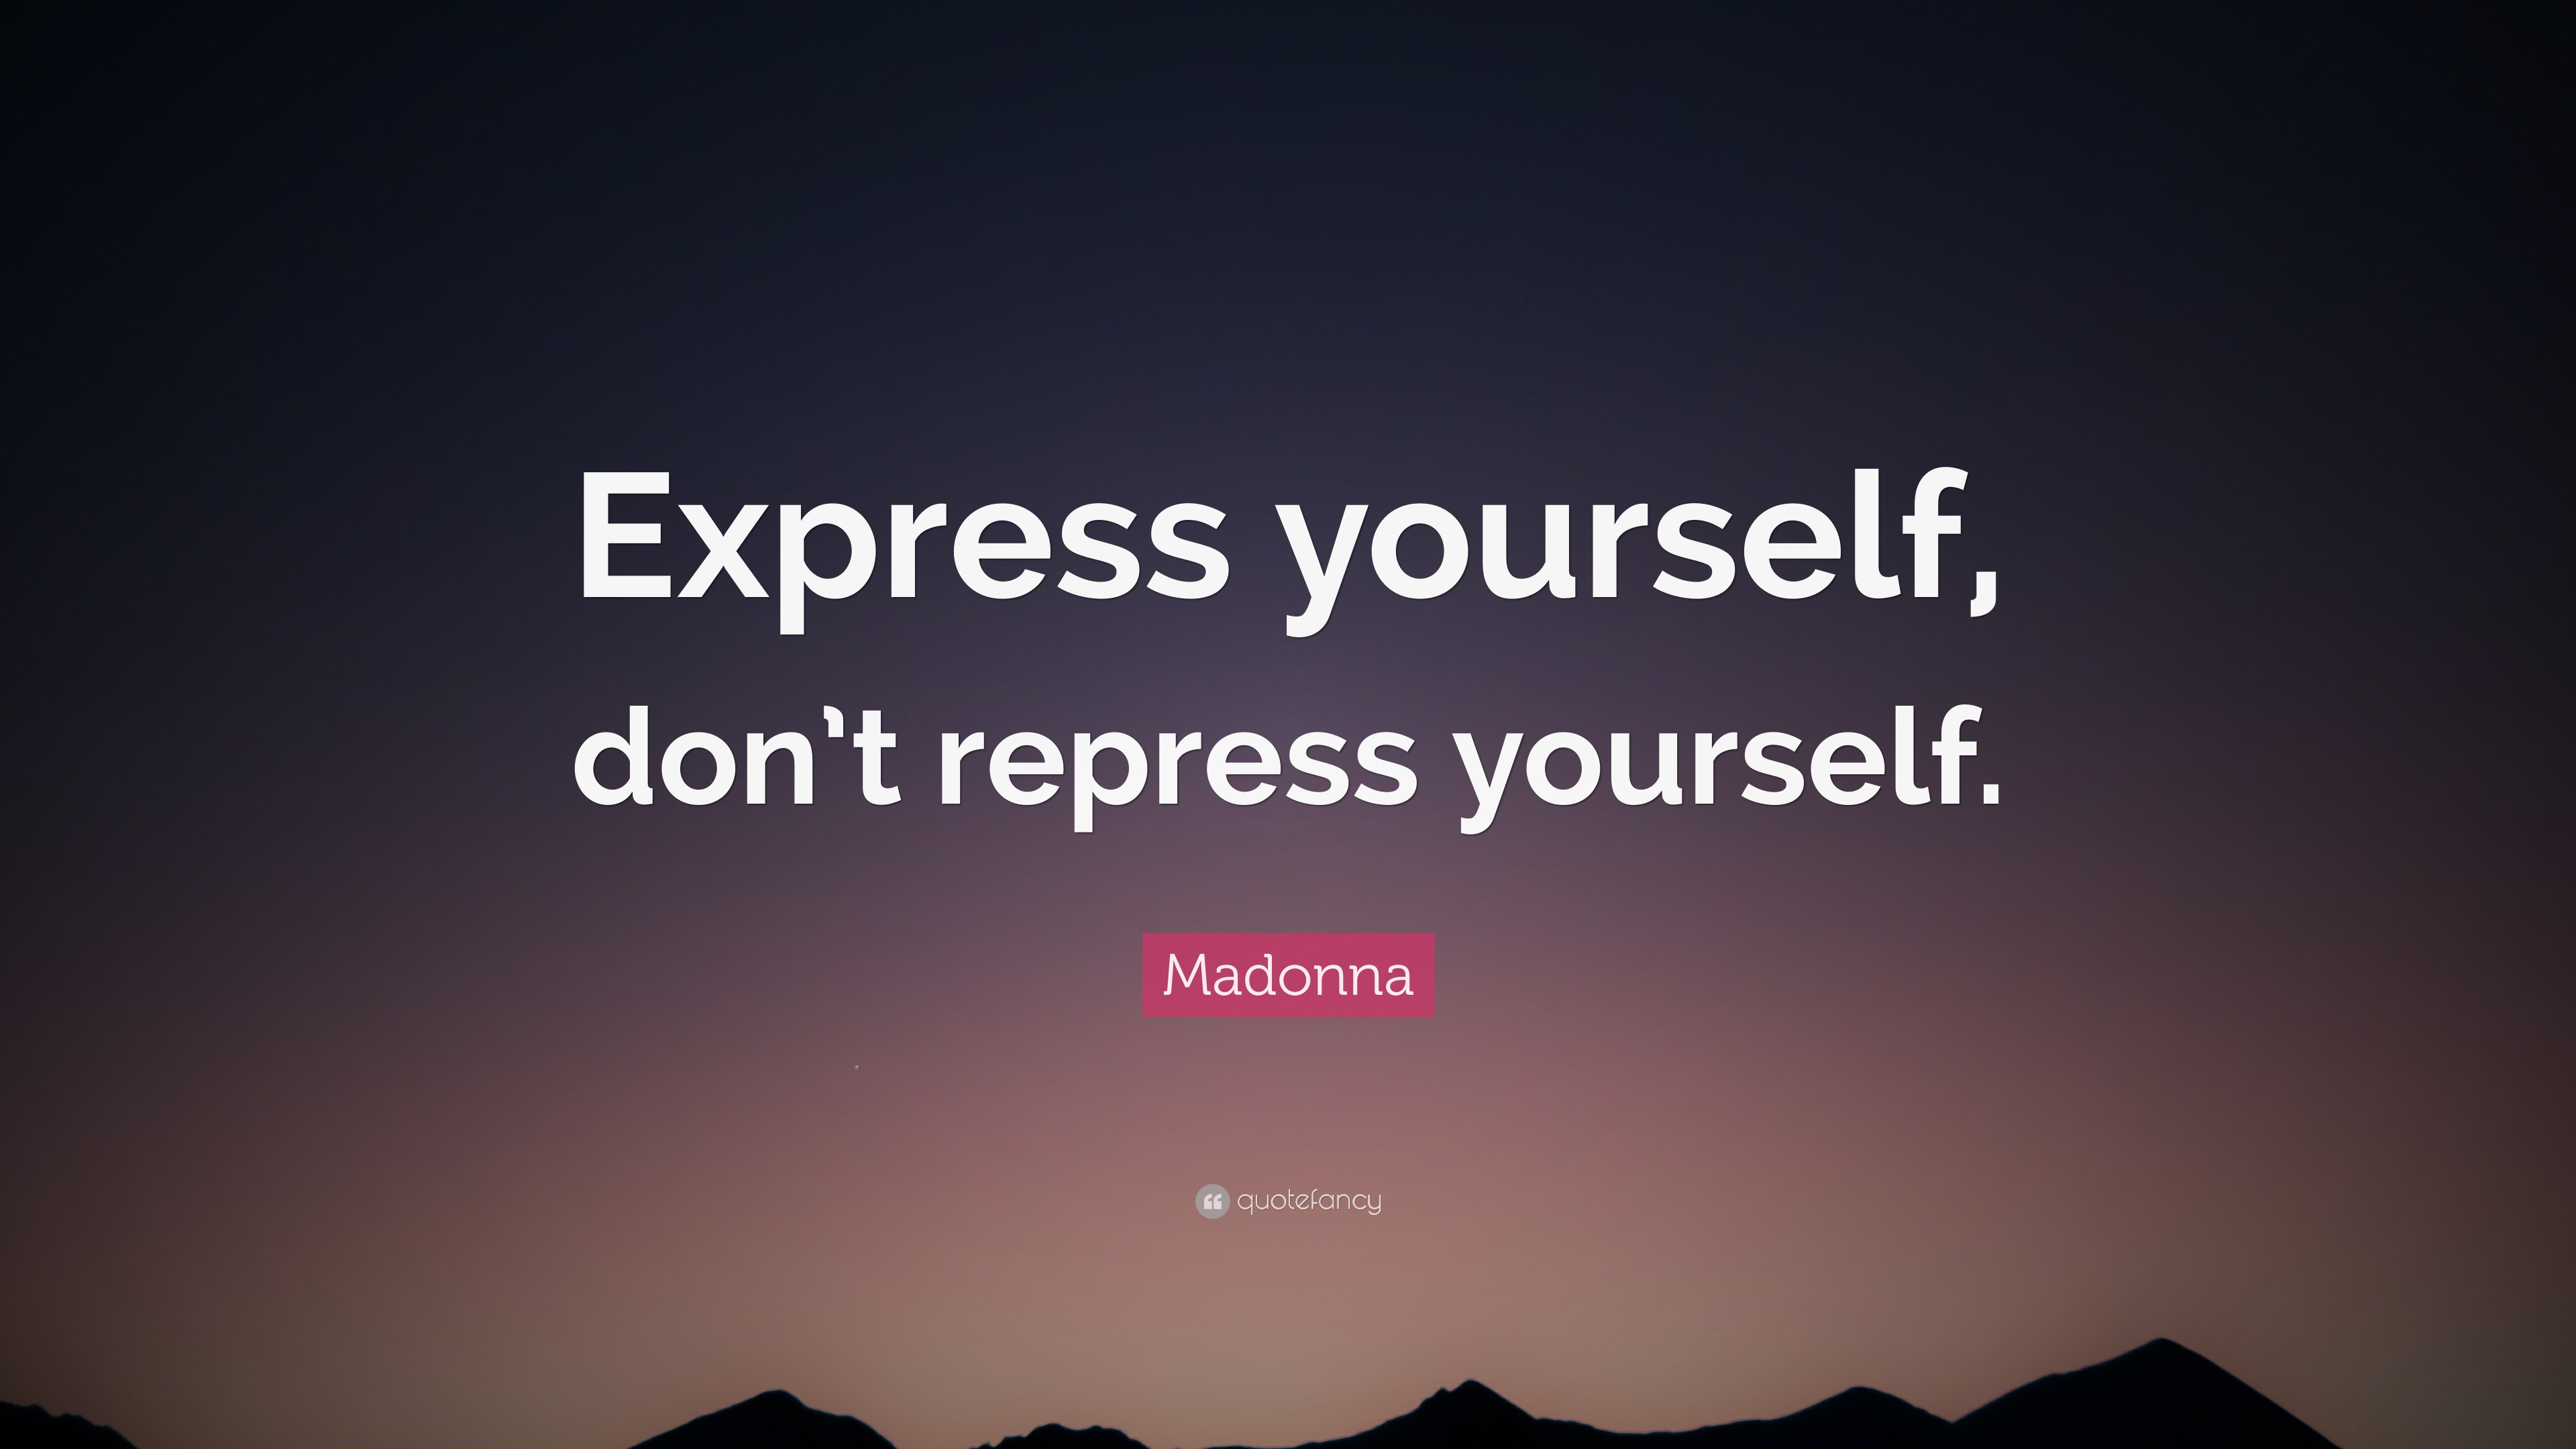 Madonna Quote: “Express yourself, don't repress yourself.”